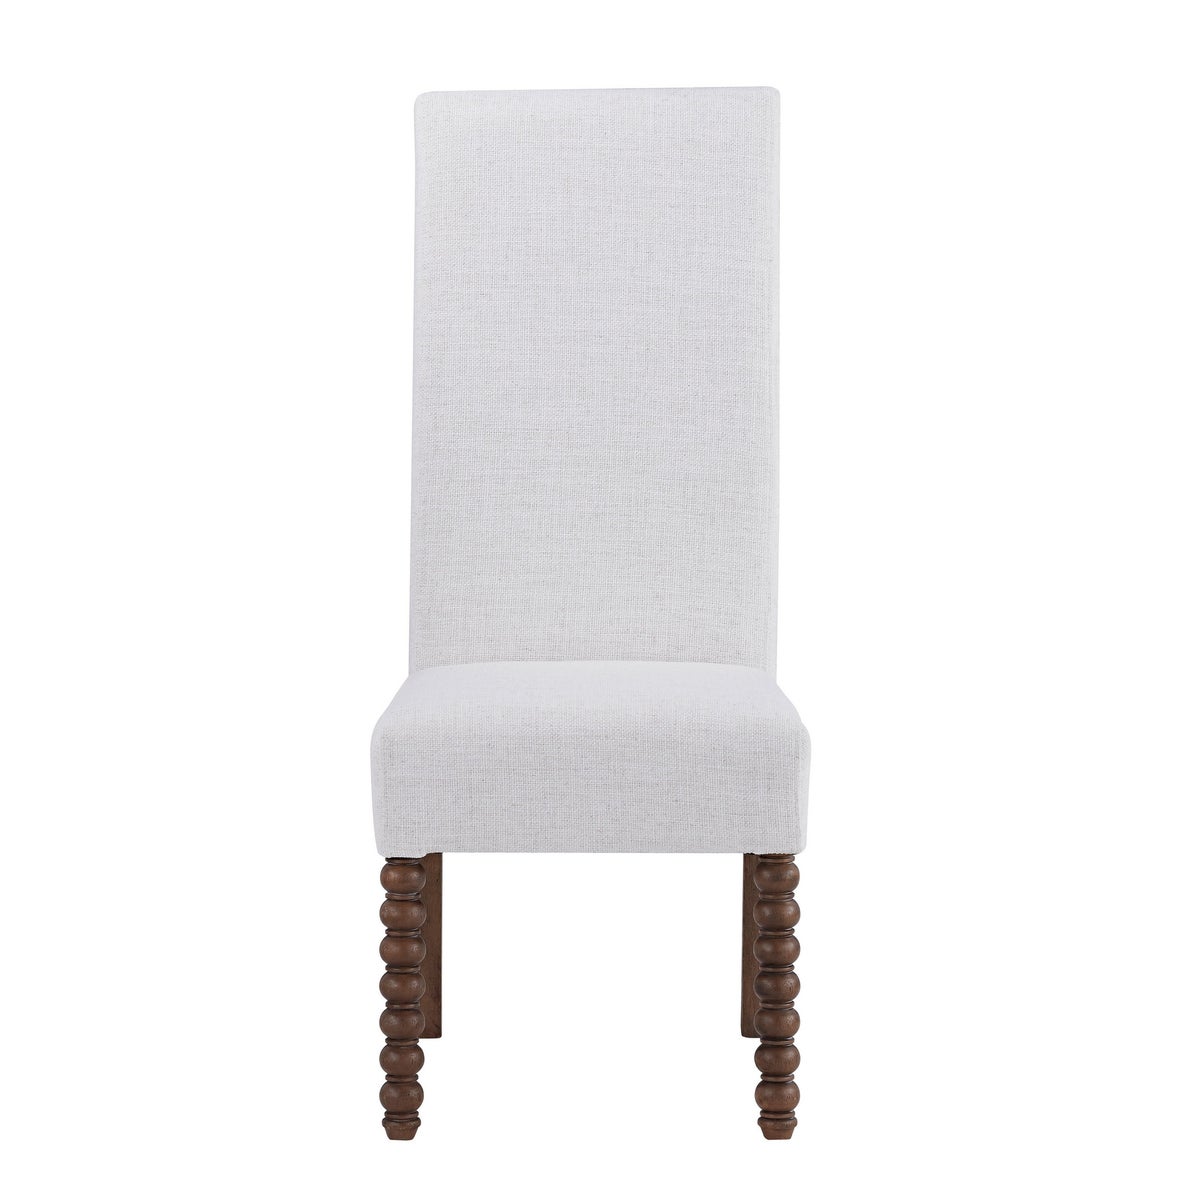 -Assembled Classic Parsons Chair III (Cotton Boll)